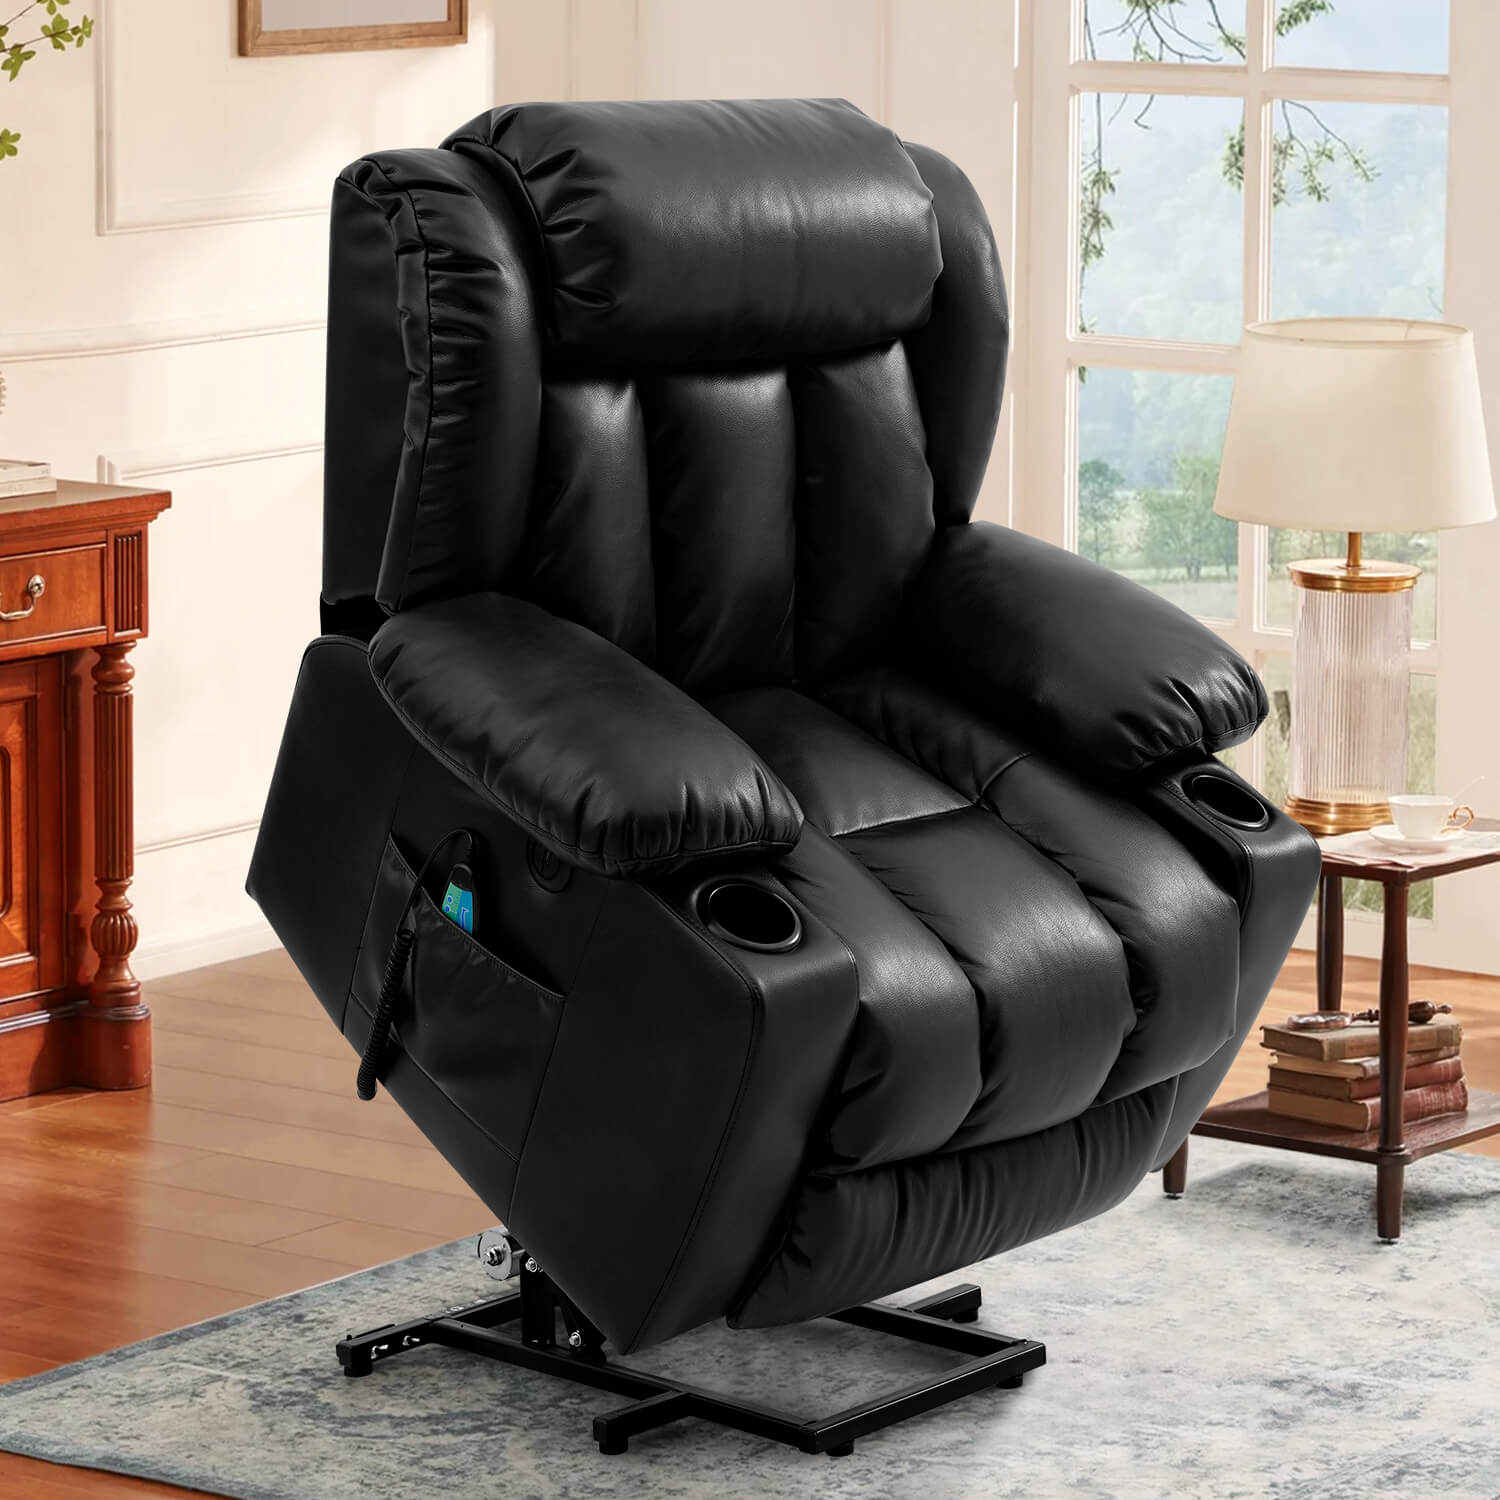 soulout black lift chair in the raised position